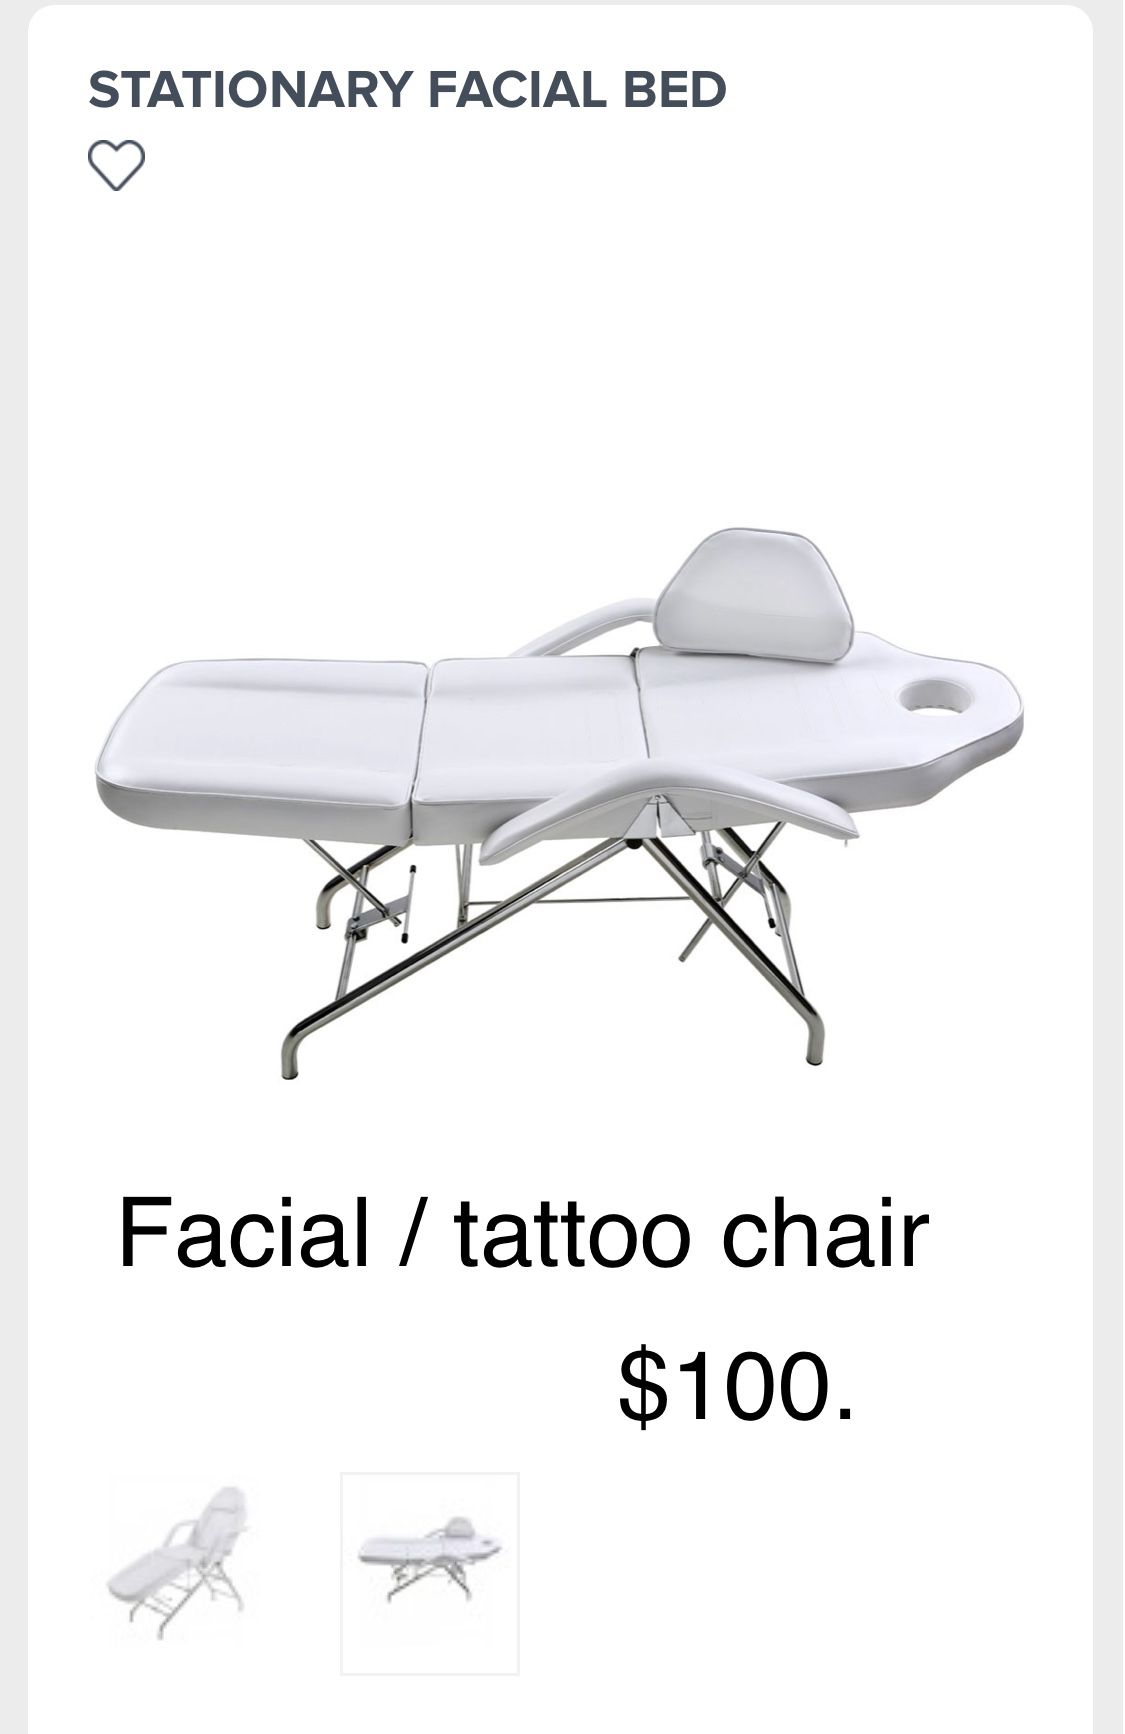 Beauty spa tattoo chair folds up not really for portable work but easy to move